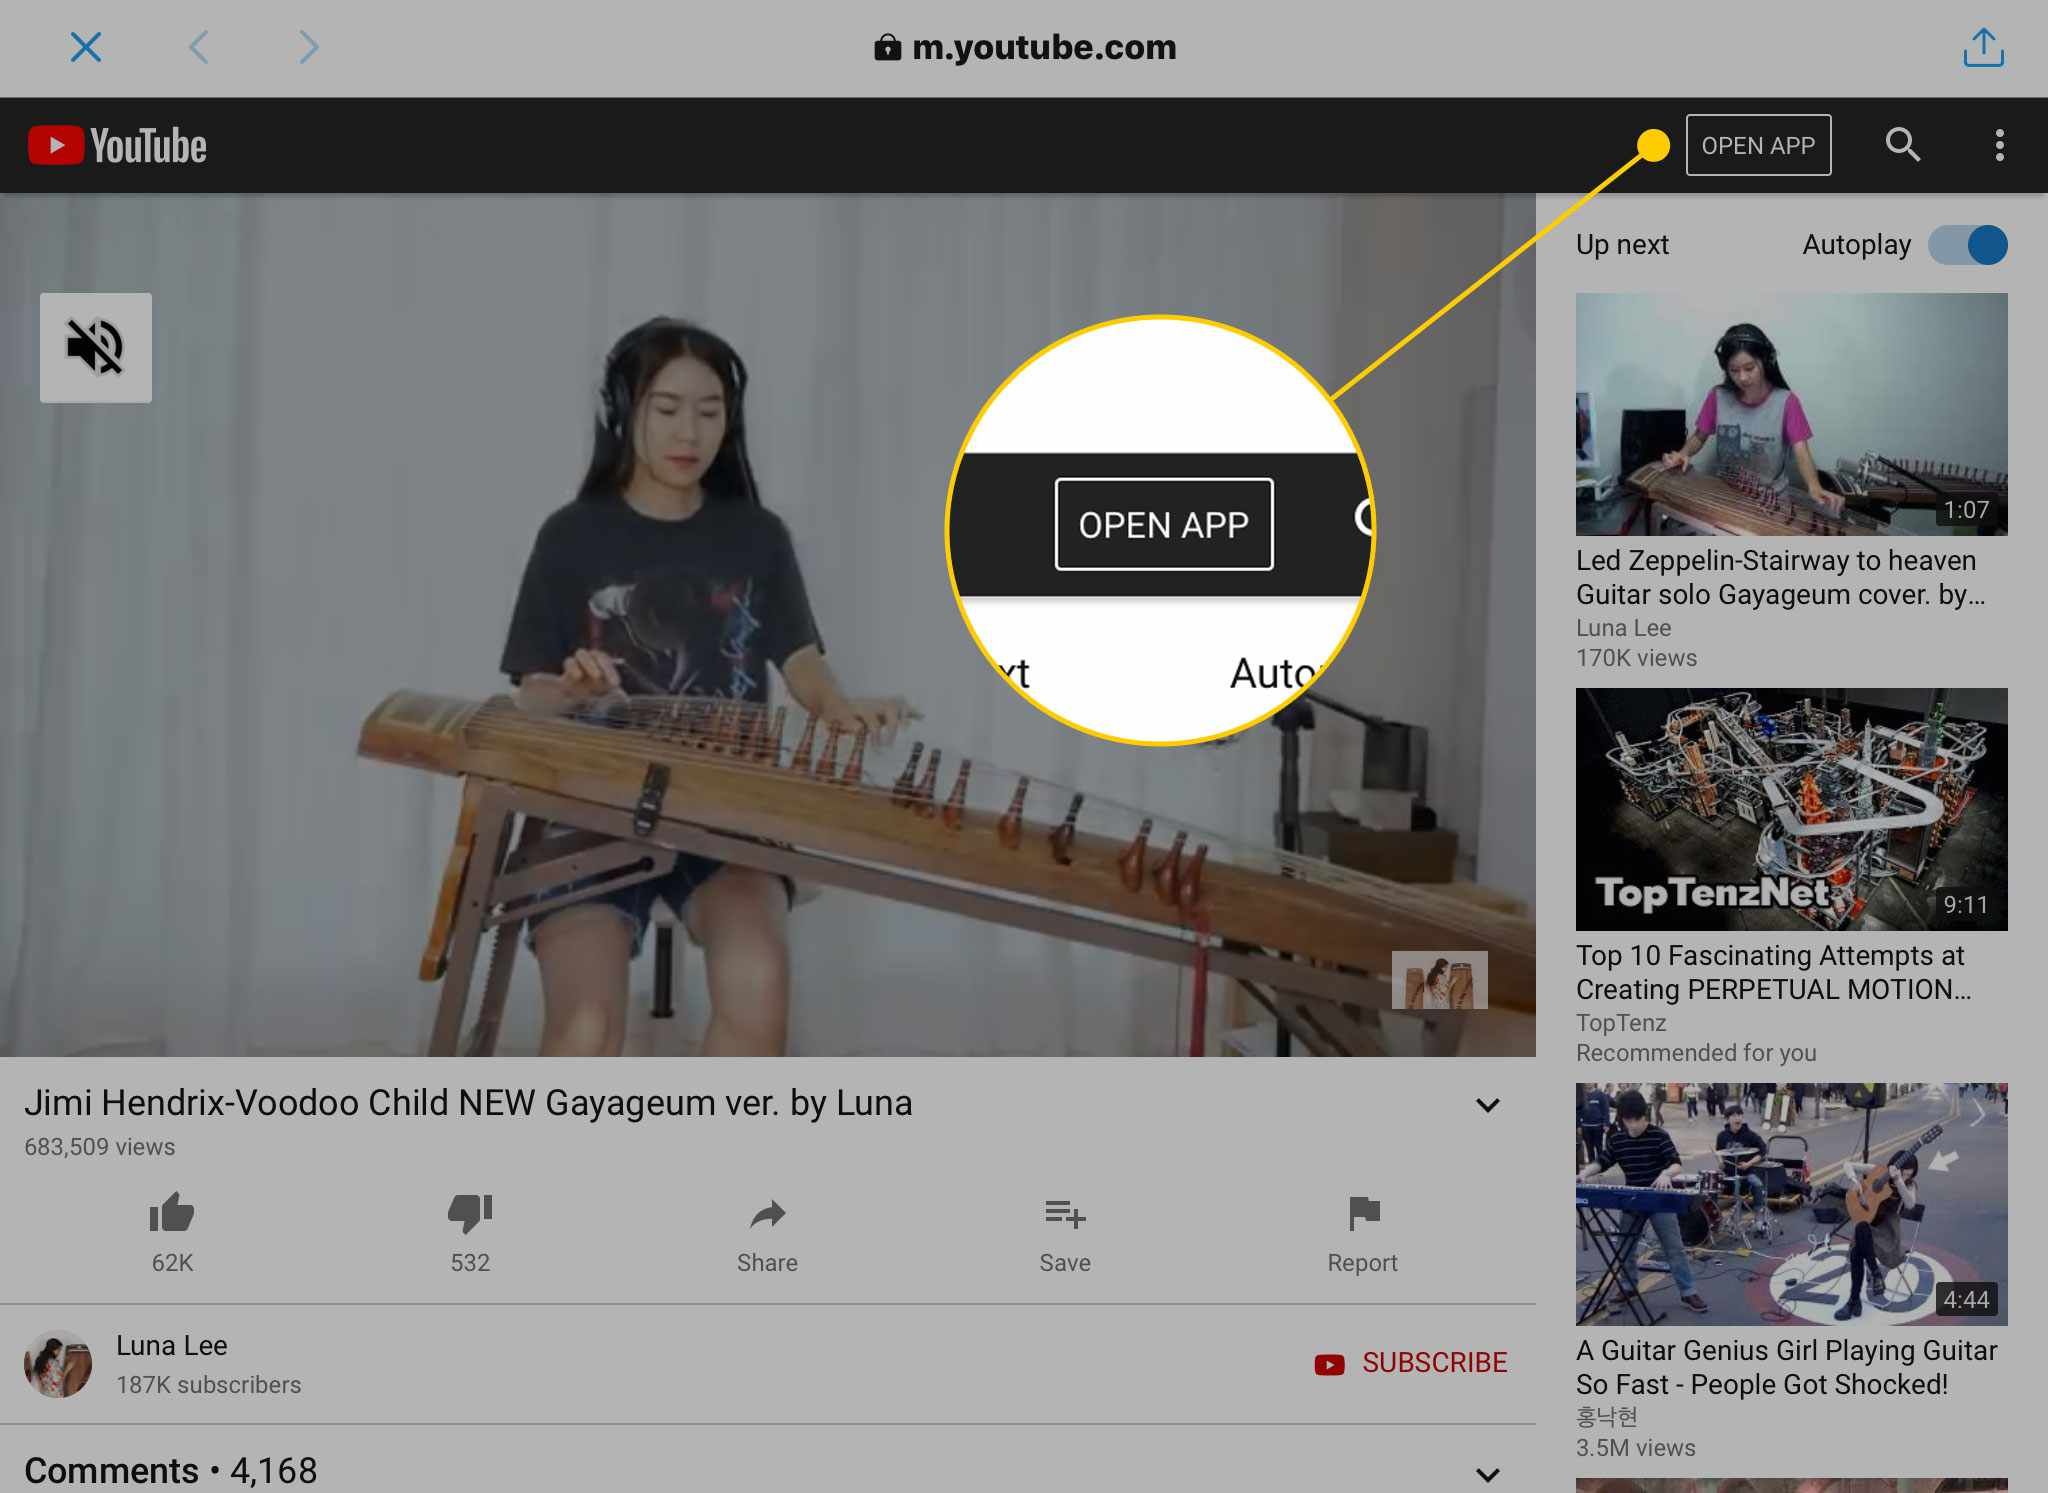 YouTube's mobile site on an iPad with the Open App button highlighted